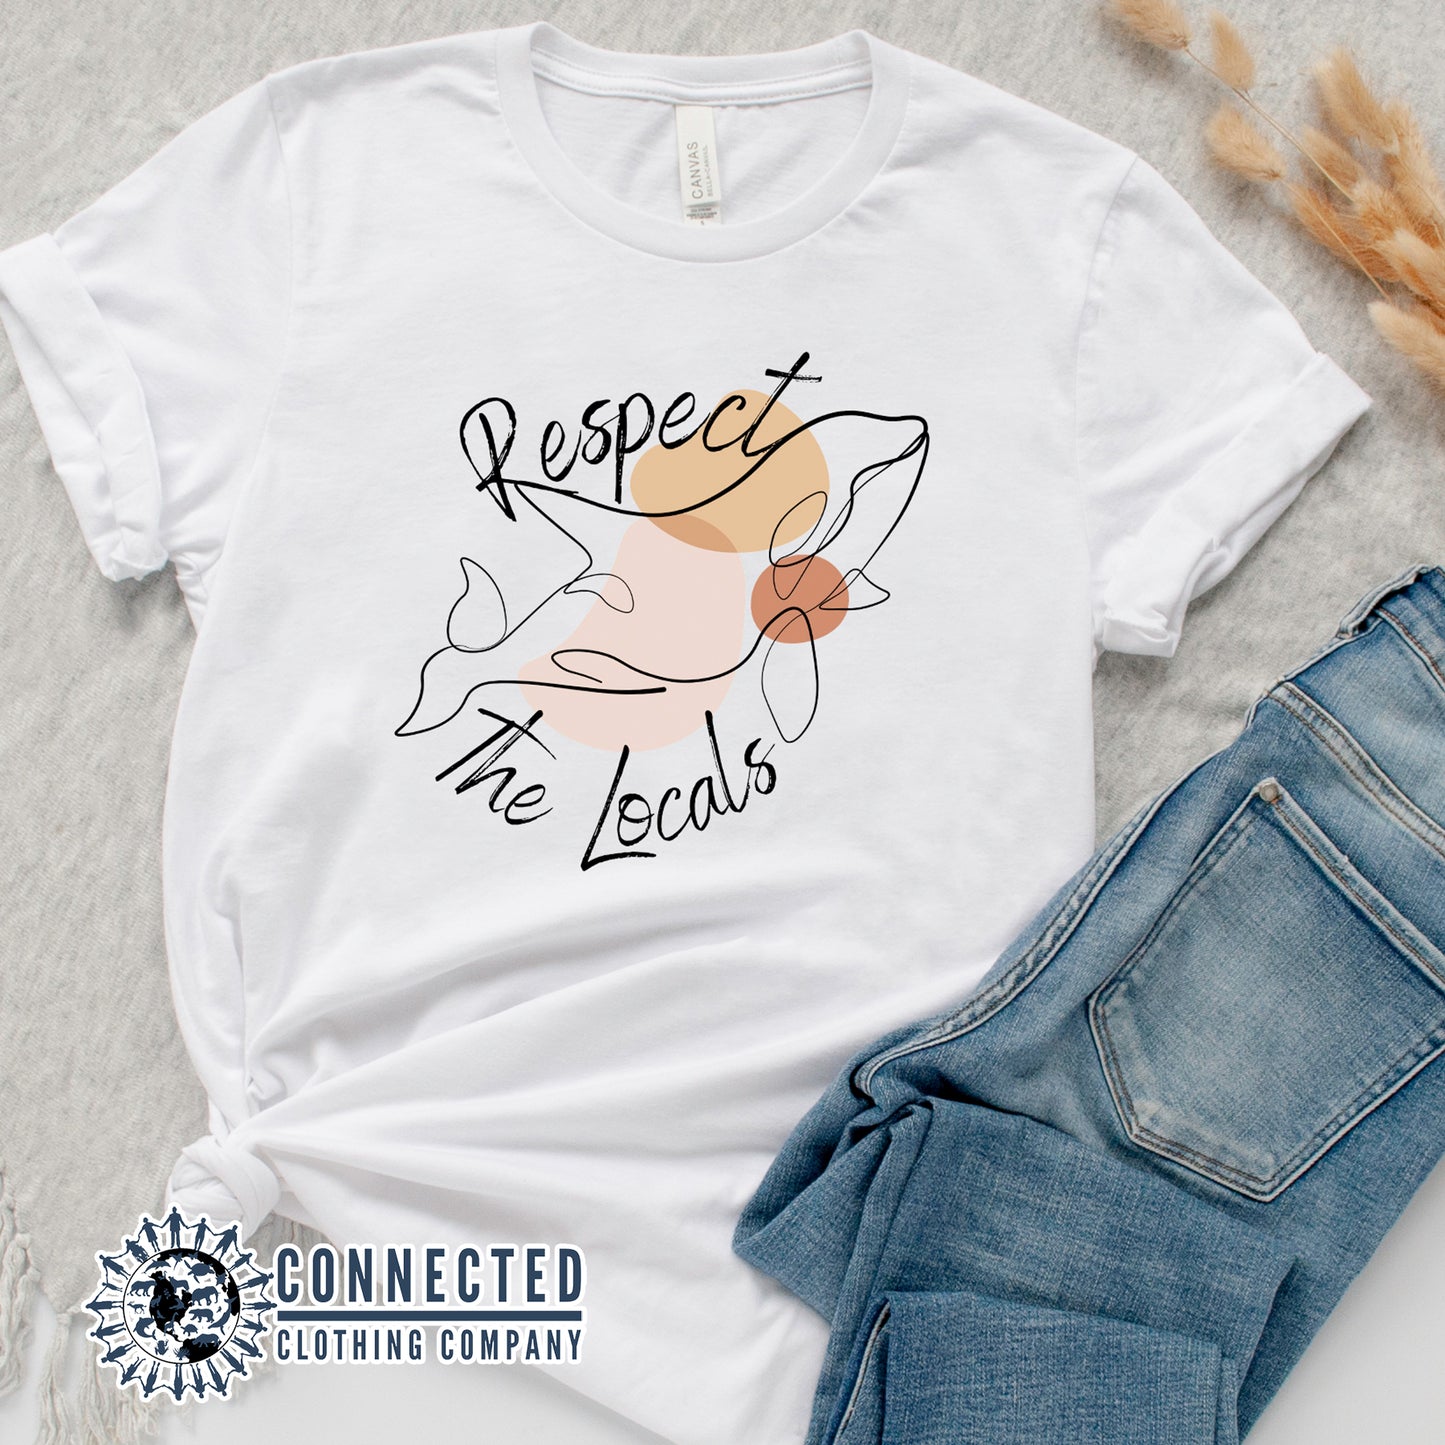  White Respect The Locals Orca Unisex Short-Sleeve Tee - sweetsherriloudesigns - Ethically and Sustainably Made - 10% of profits donated to orca conservation